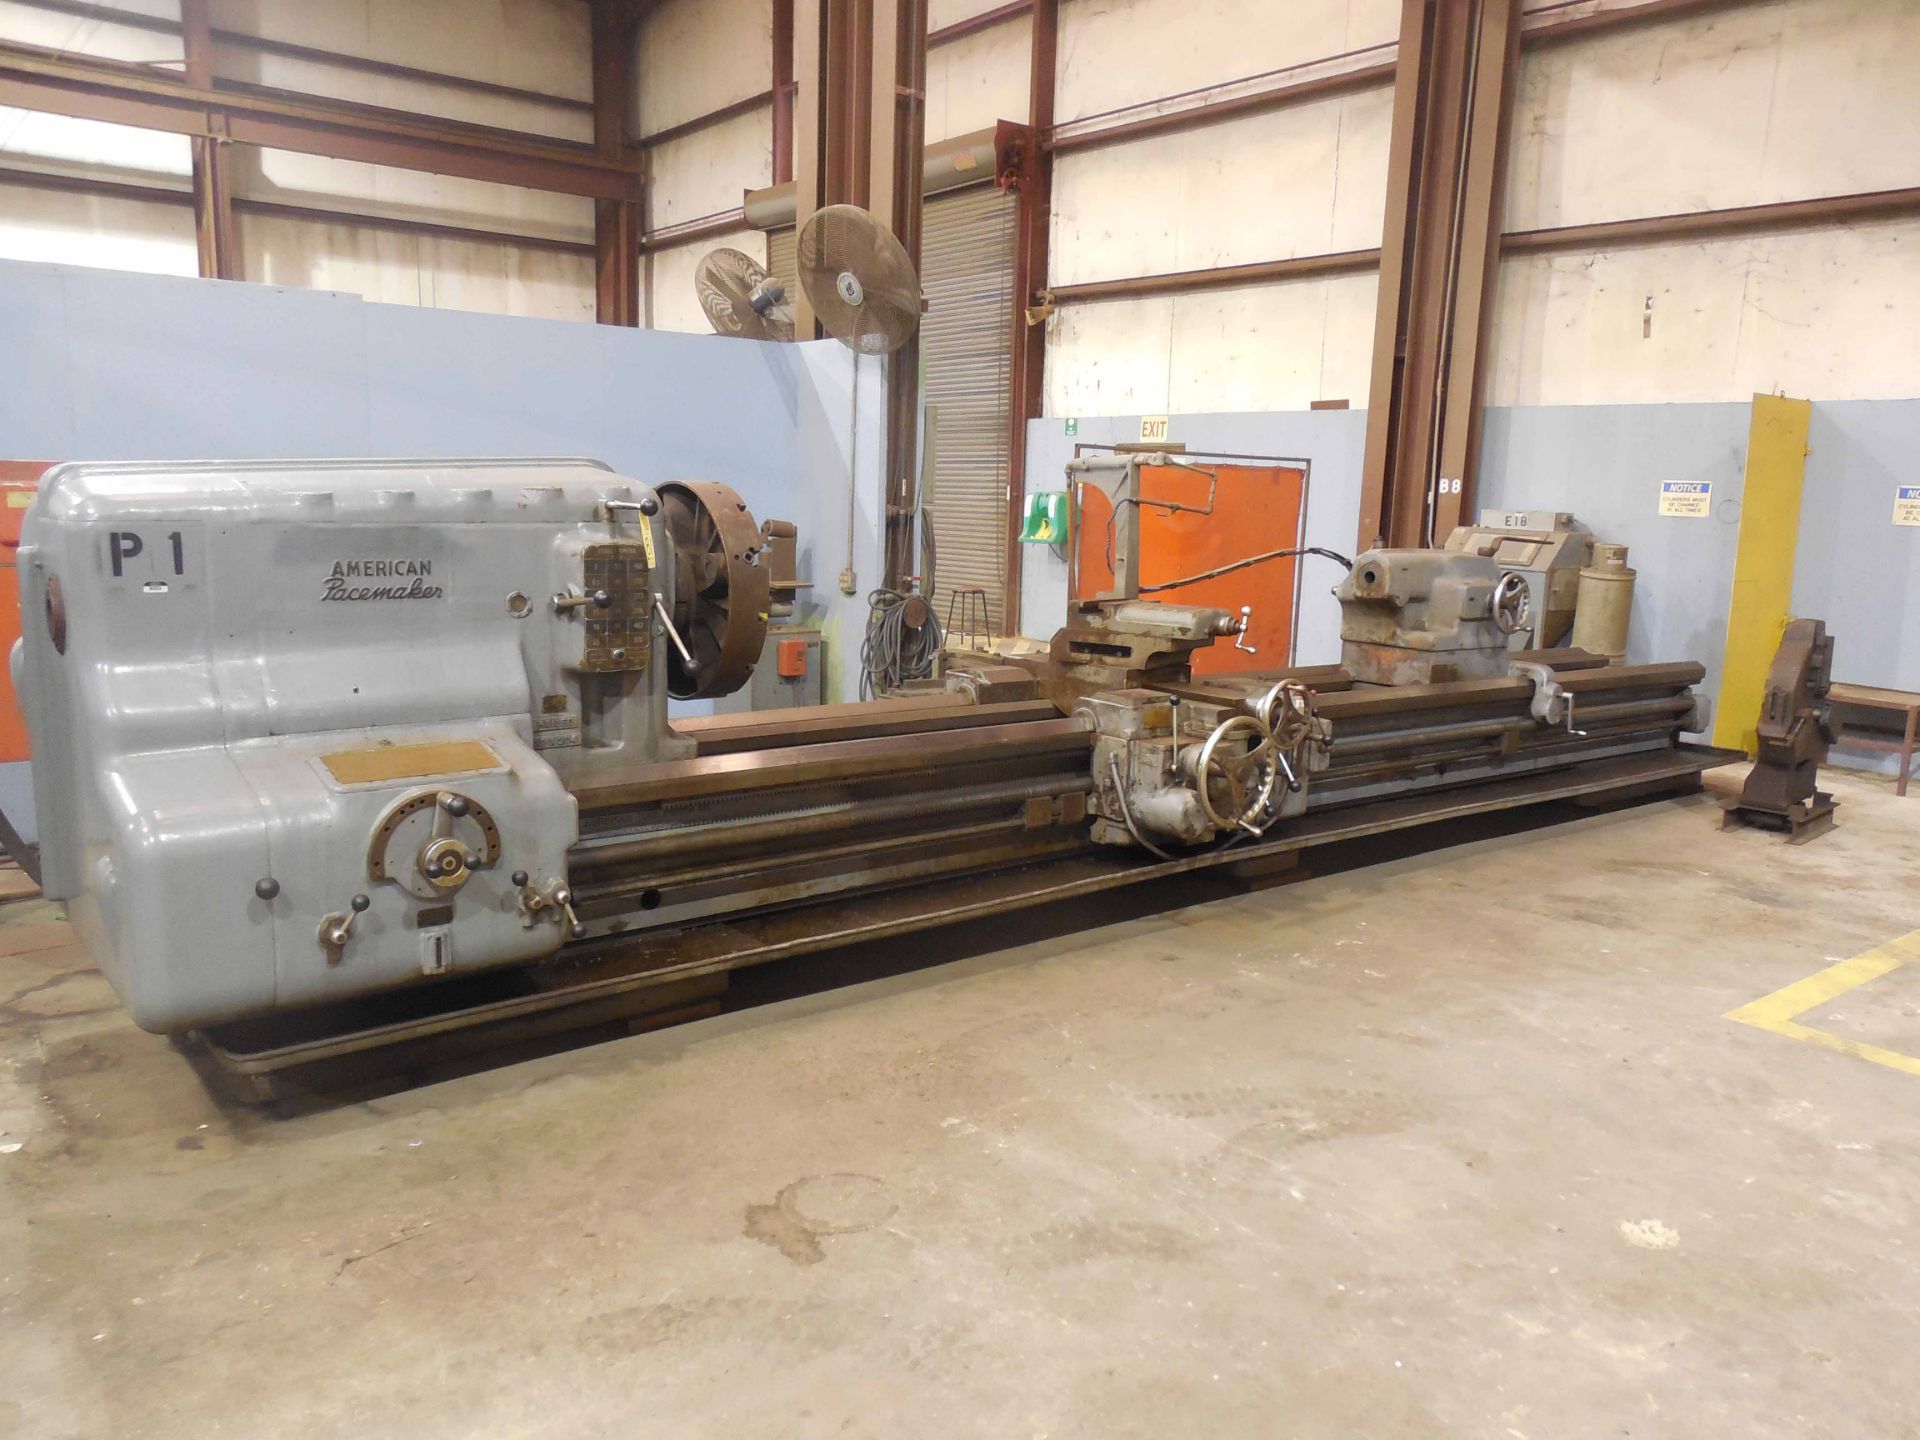 ENGINE LATHE, AMERICAN 42" X 204" PACEMAKER, approx. 28" swing over cross slide, 2-3/4" spdl.